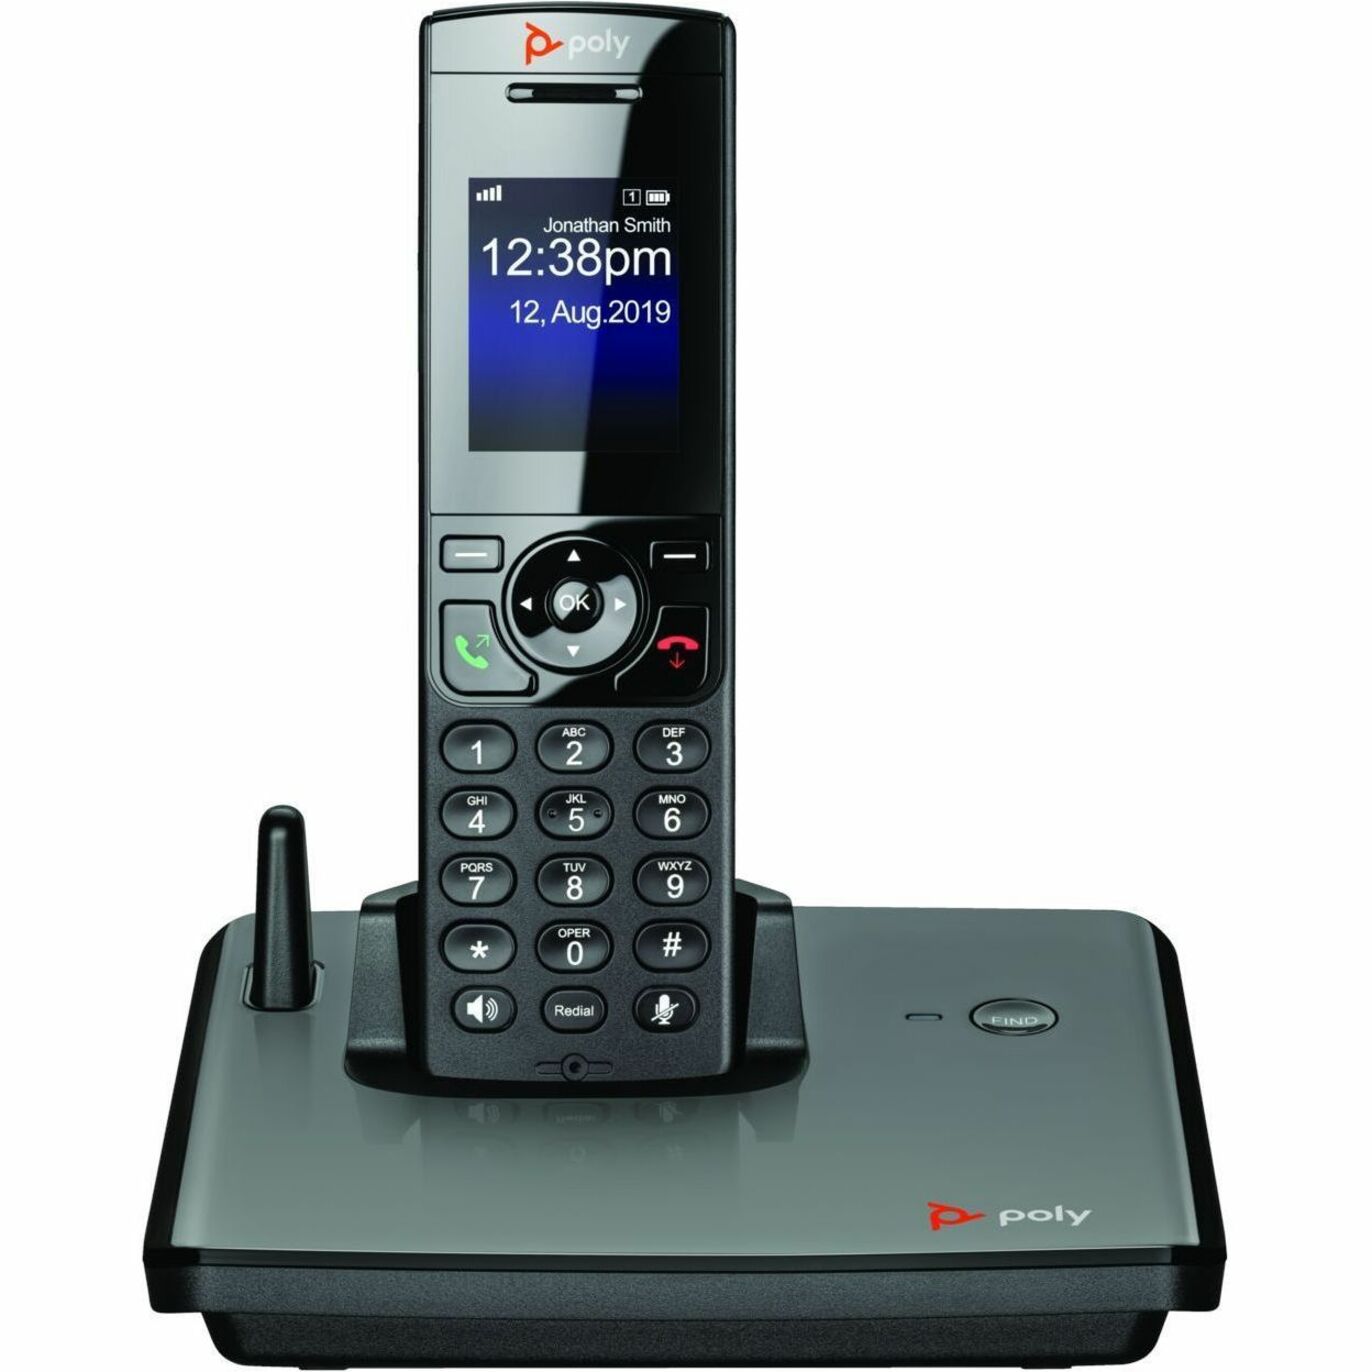 Poly VVX D230 DECT Phone Handset and Charging Cradle with Power Supply, Wireless Technology, Speakerphone